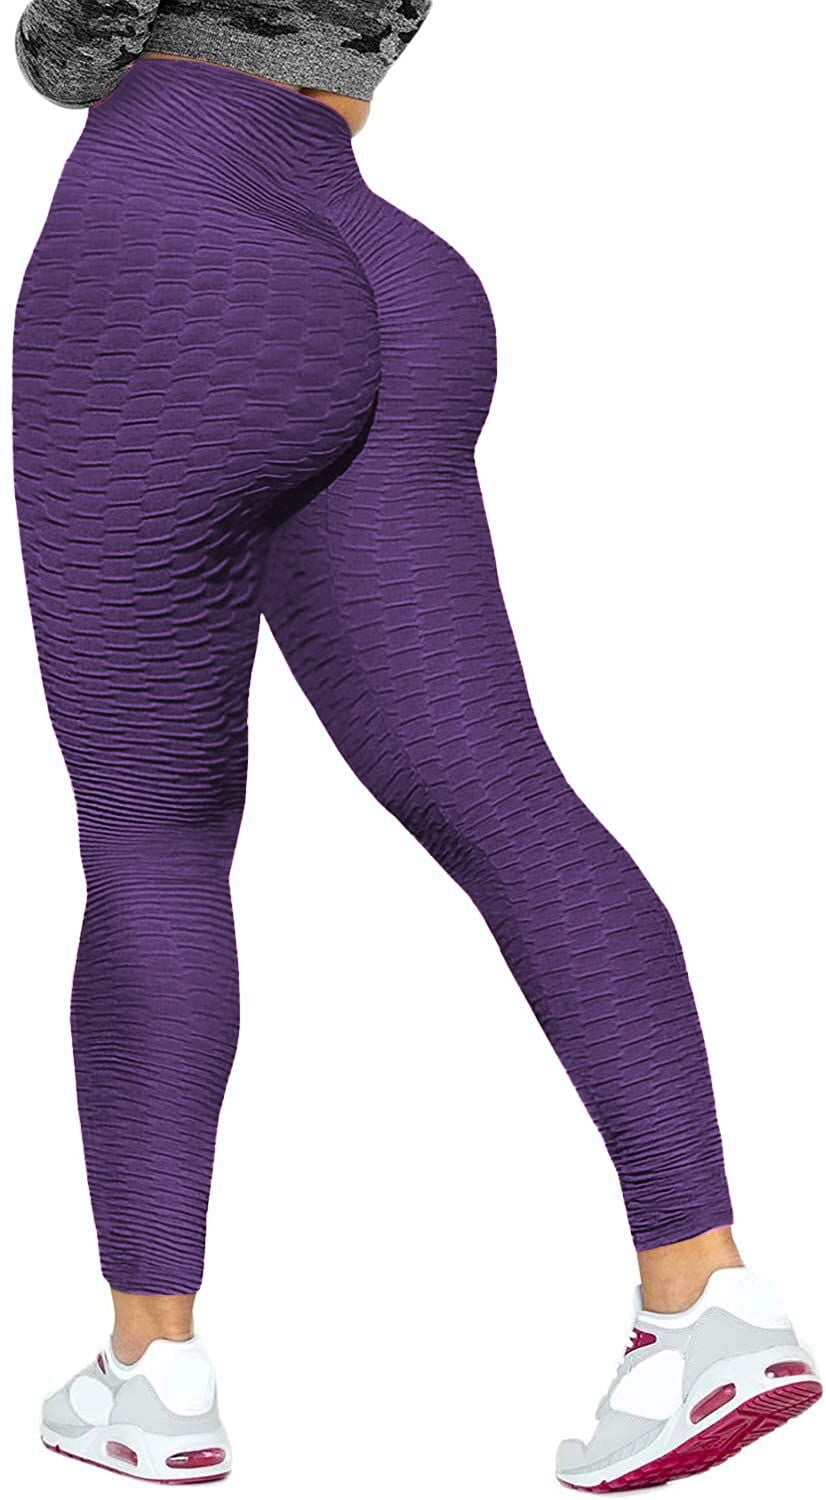 COMFREE Womens Anti Cellulite High Waisted Yoga Pants Tummy